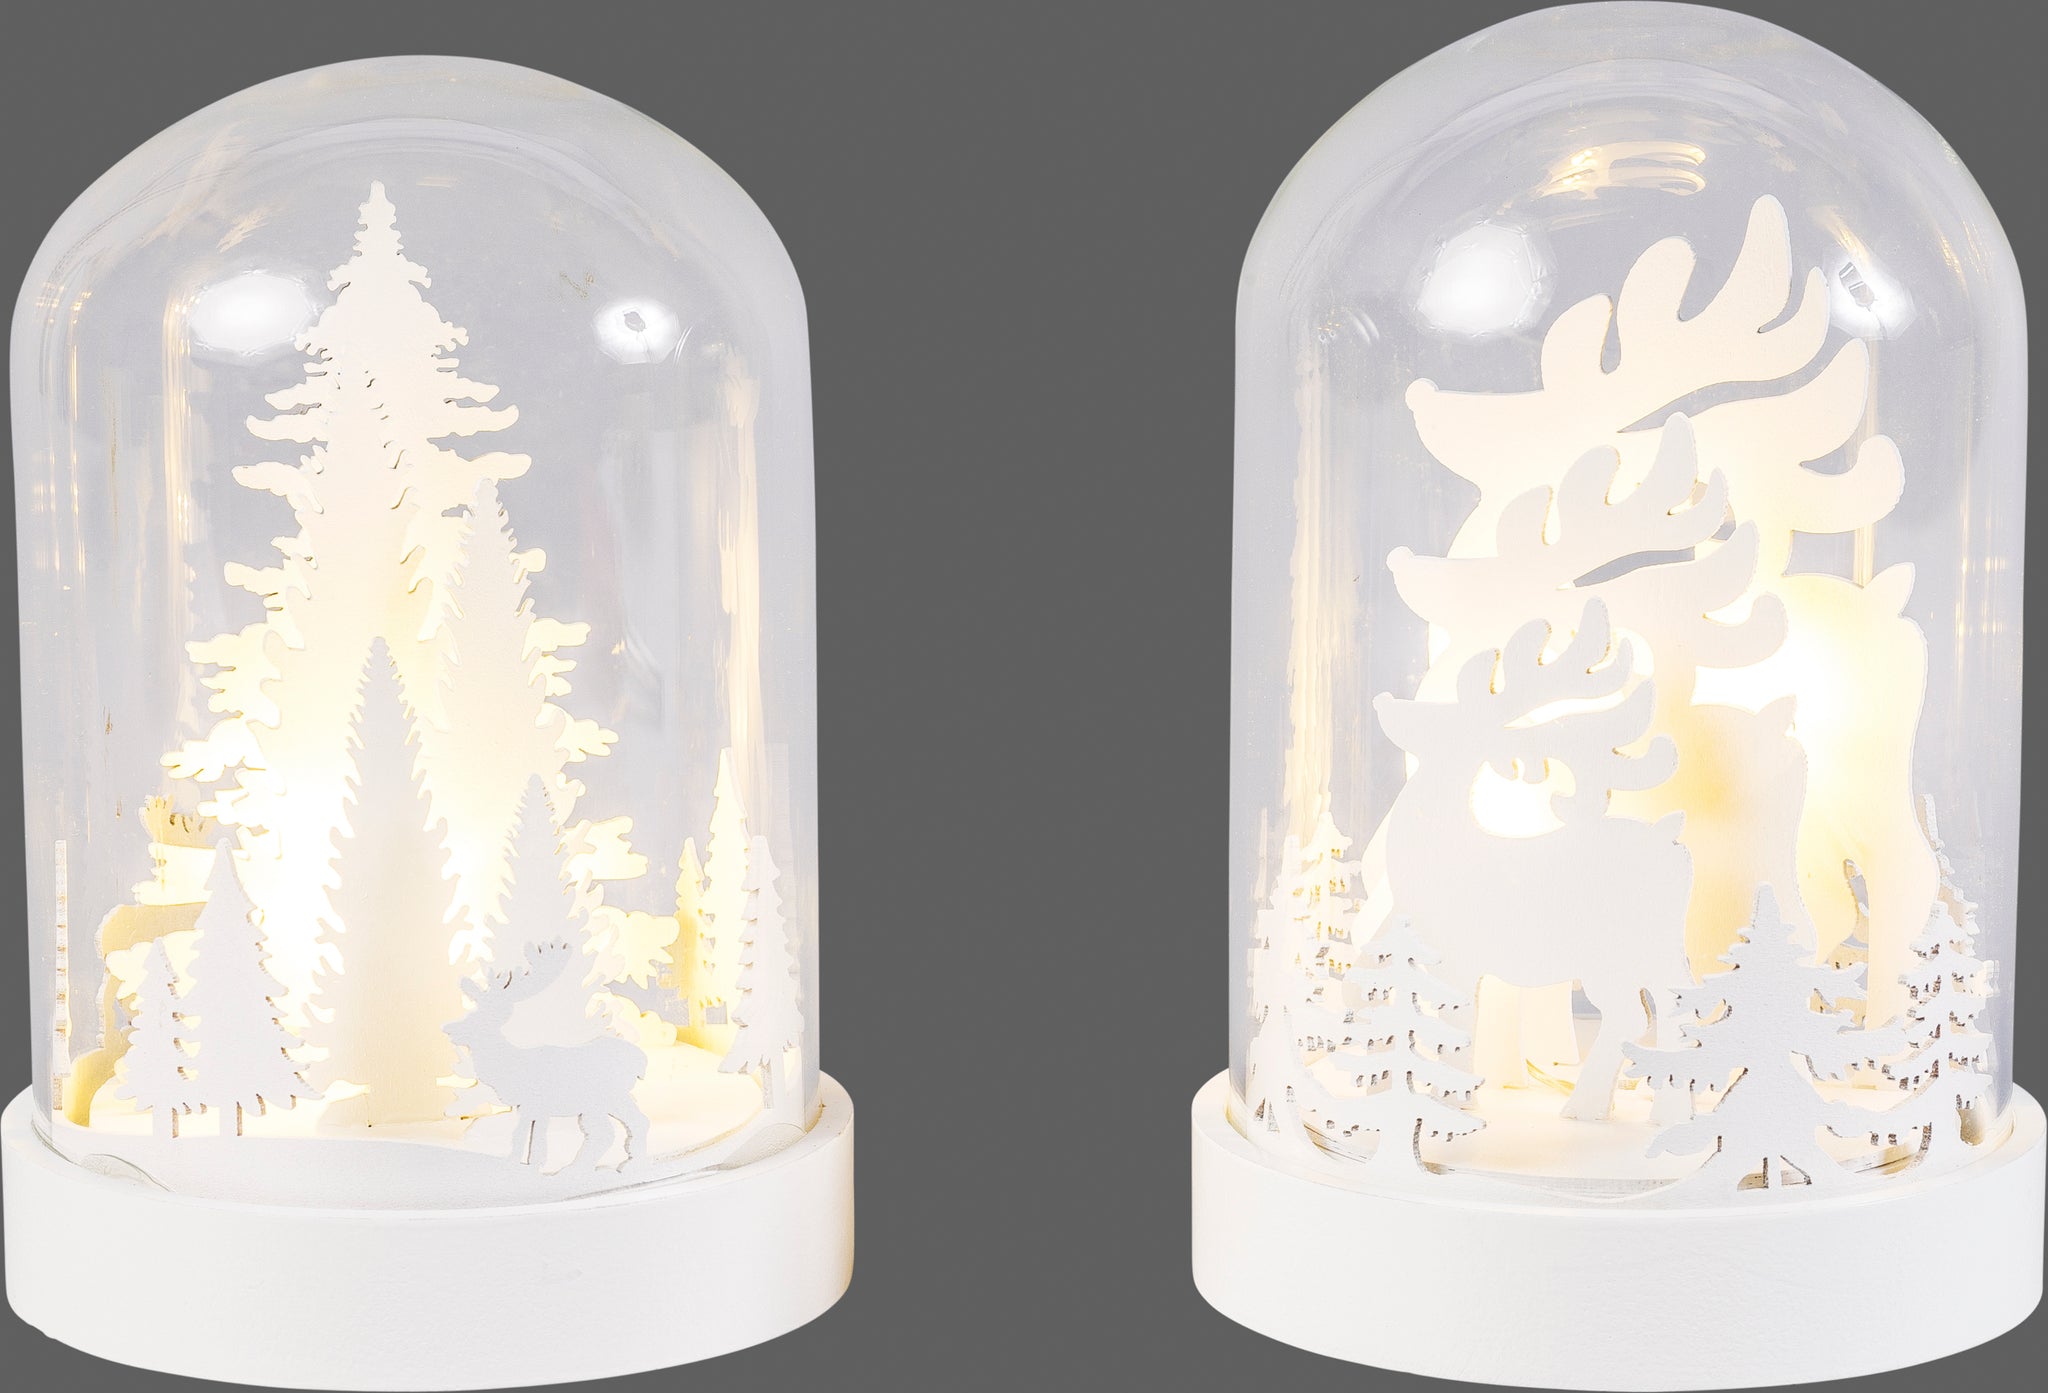 Glass dome 'forest' or 'deer' with 3 LEDs